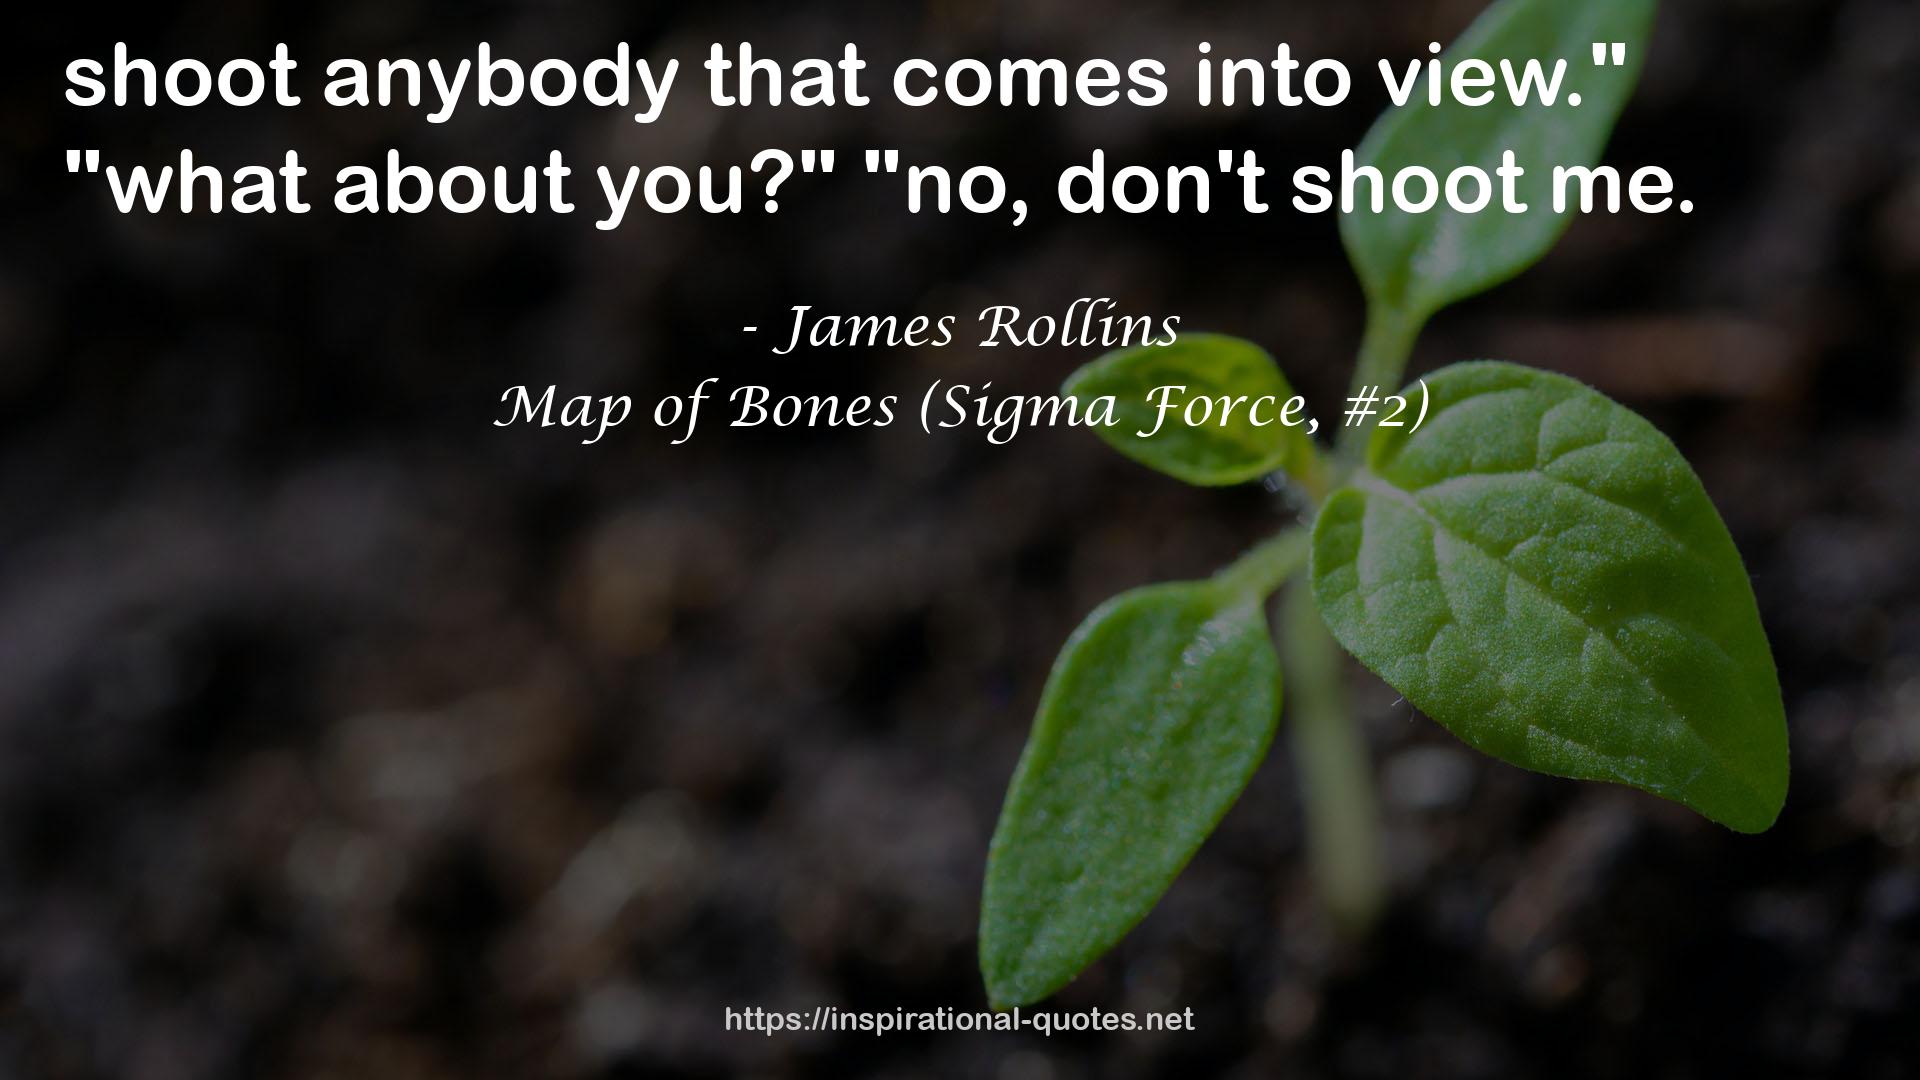 Map of Bones (Sigma Force, #2) QUOTES